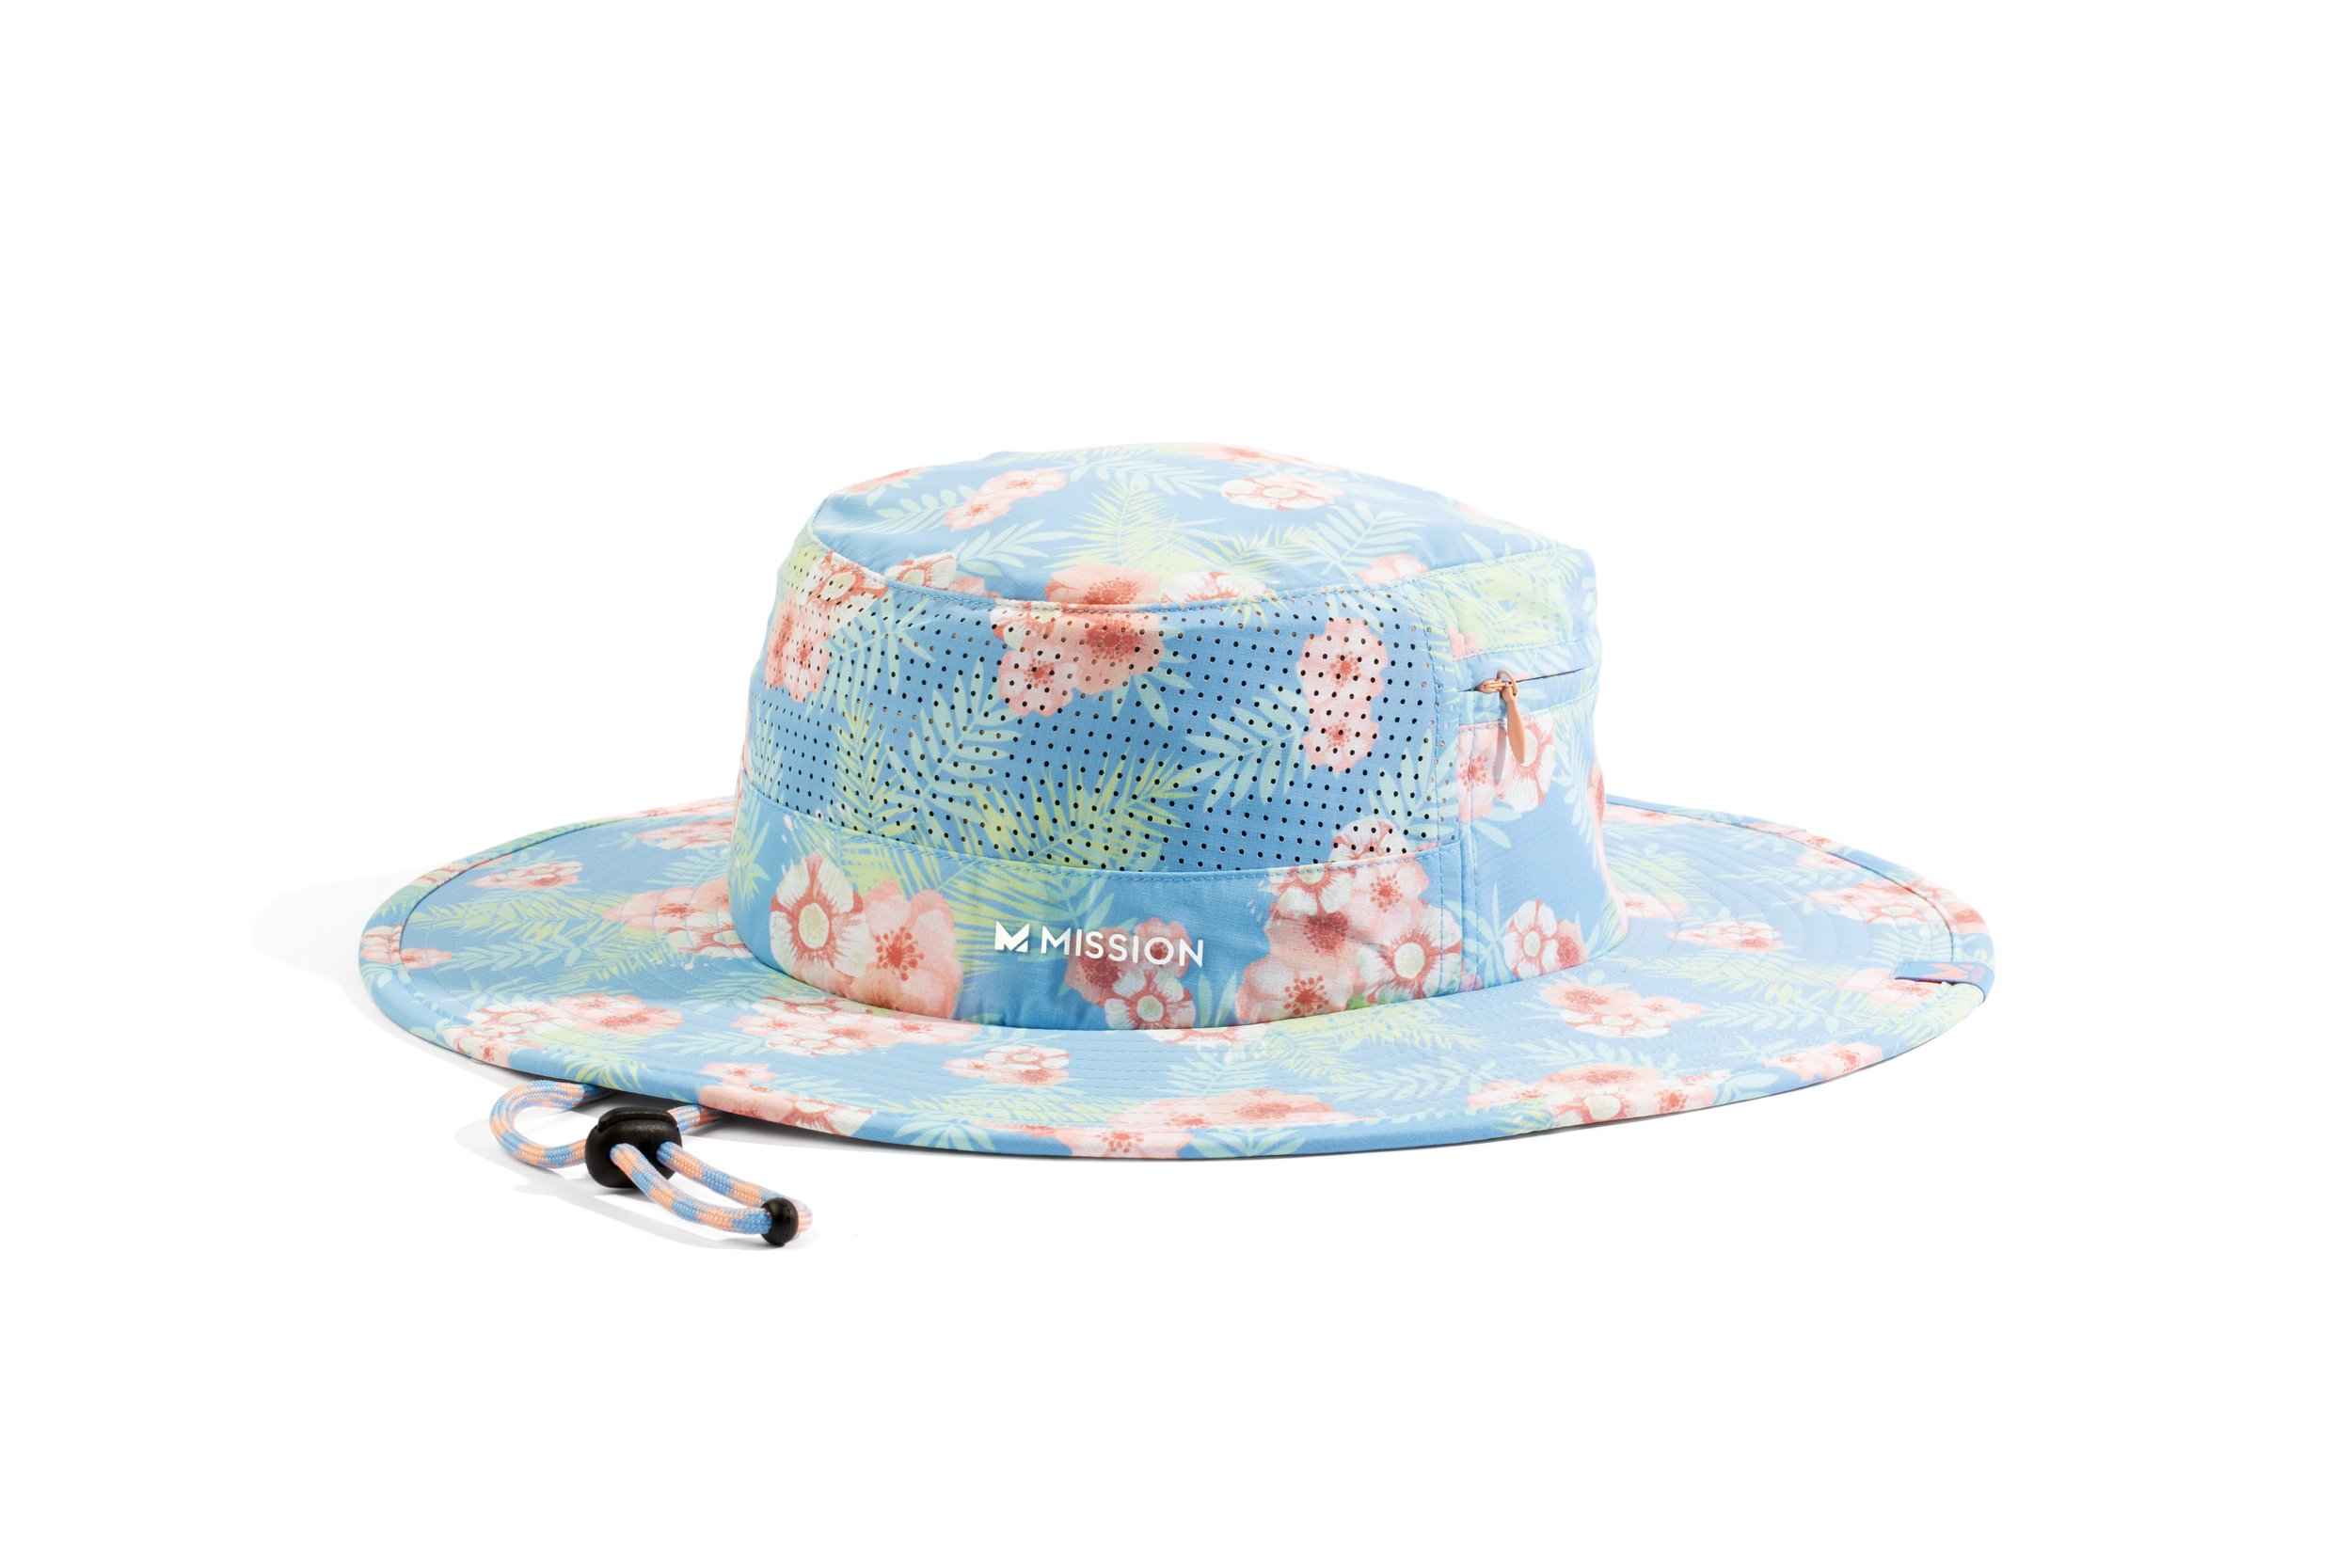 Mission_Cooling Anywhere Boonie Hat_Junglebird Bluebell_$29.99.jpg